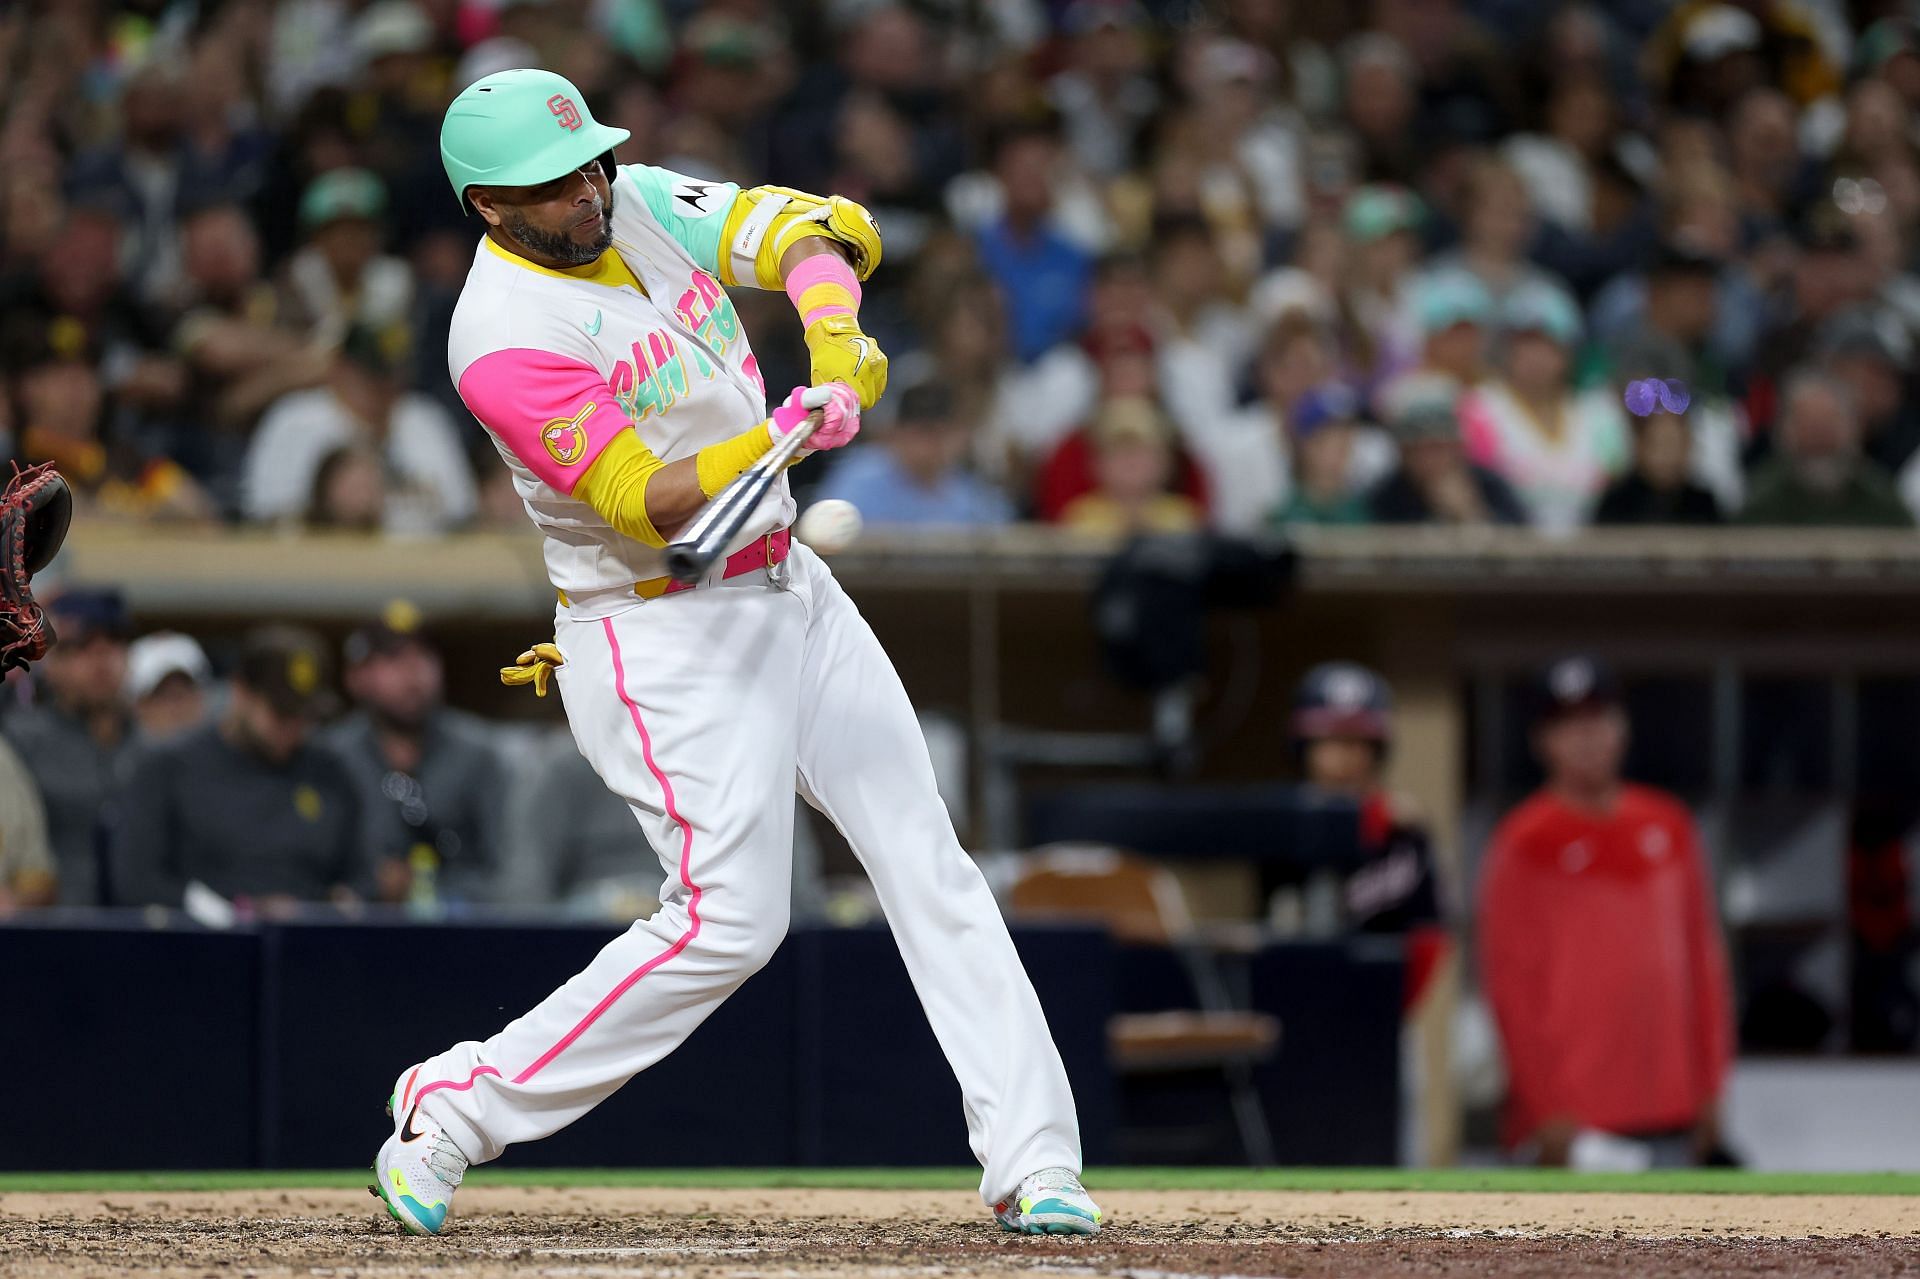 This season, Nelson Cruz has hit 5 home runs and 22 RBIs as Padres&rsquo; DH.